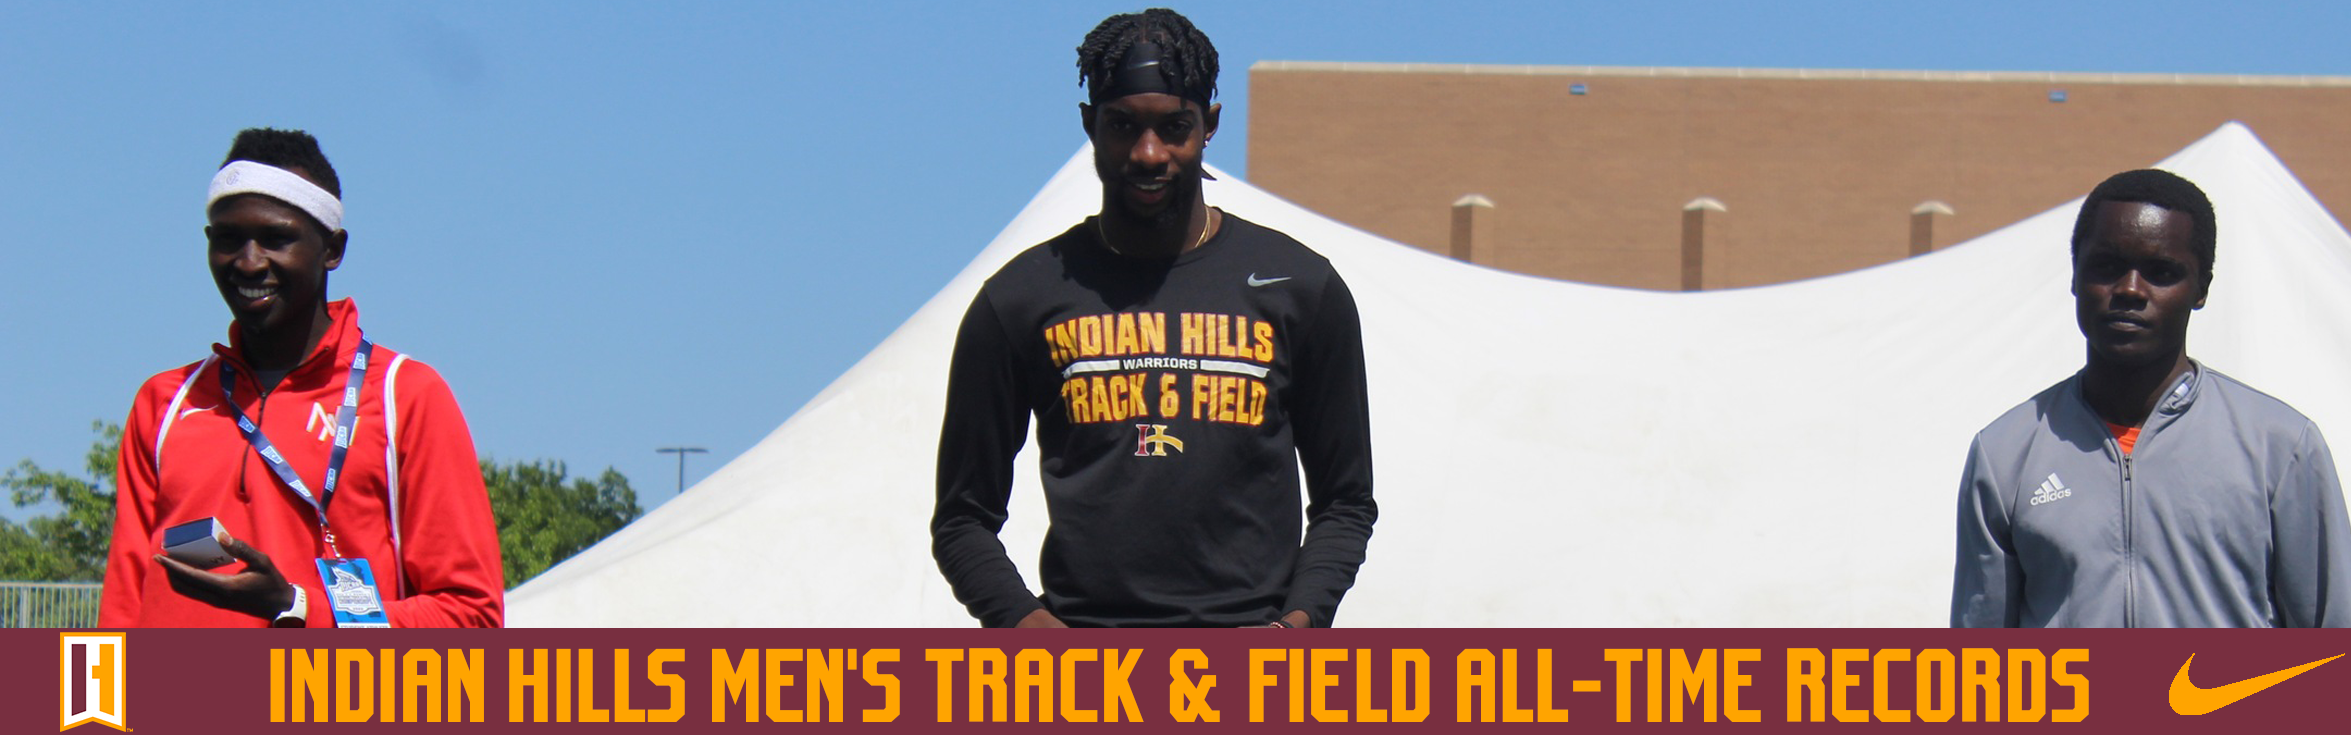 INDIAN HILLS MEN'S TRACK & FIELD RECORD BOOK